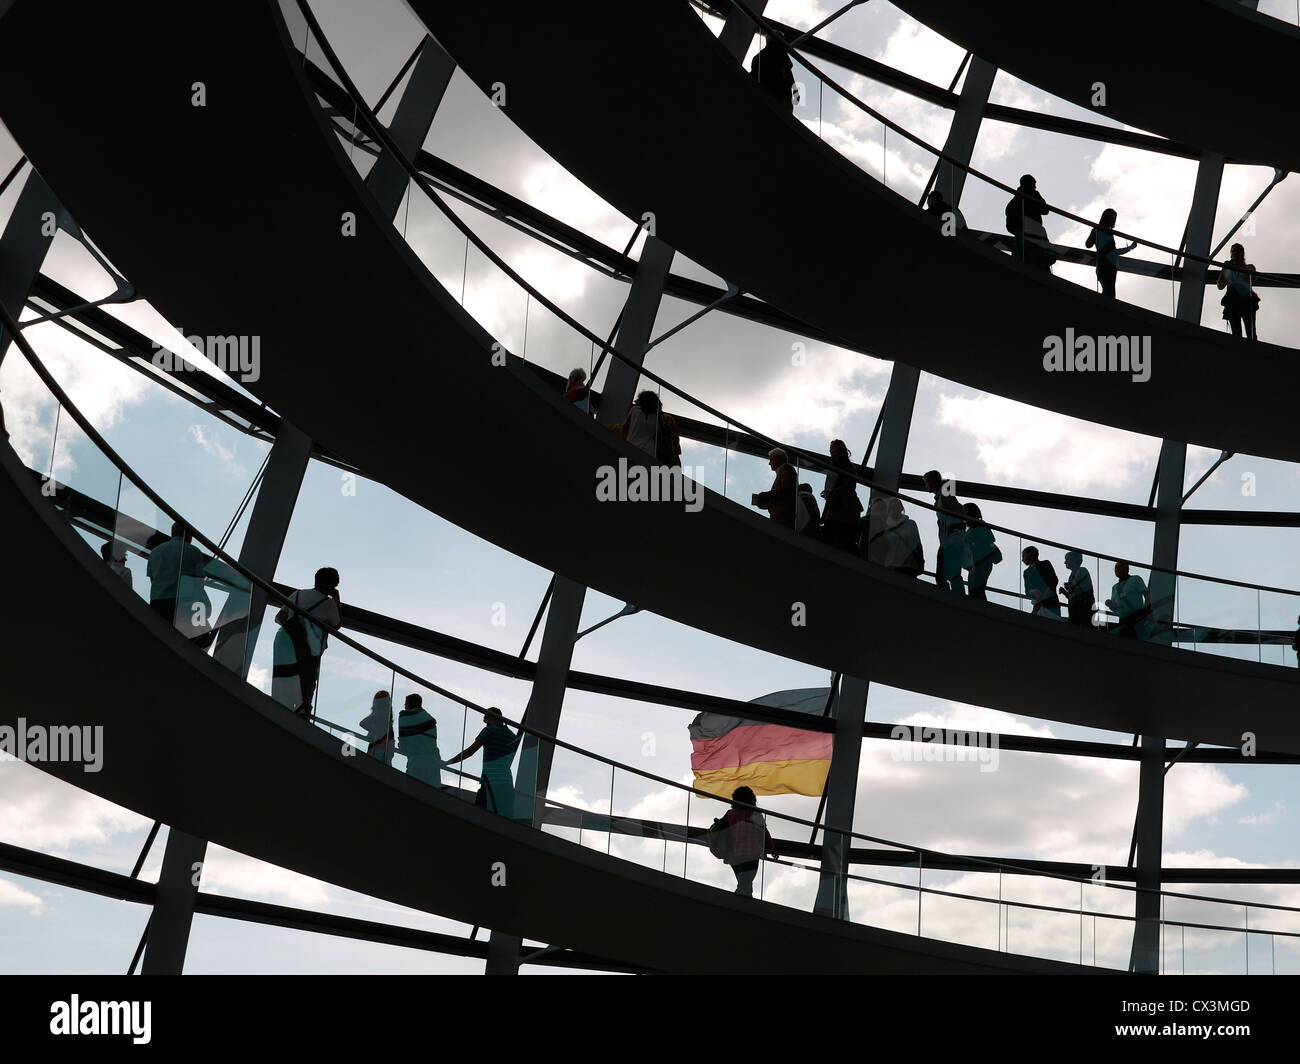 Dome of the Reichstag building,German Parliament building,Berlin Stock Photo